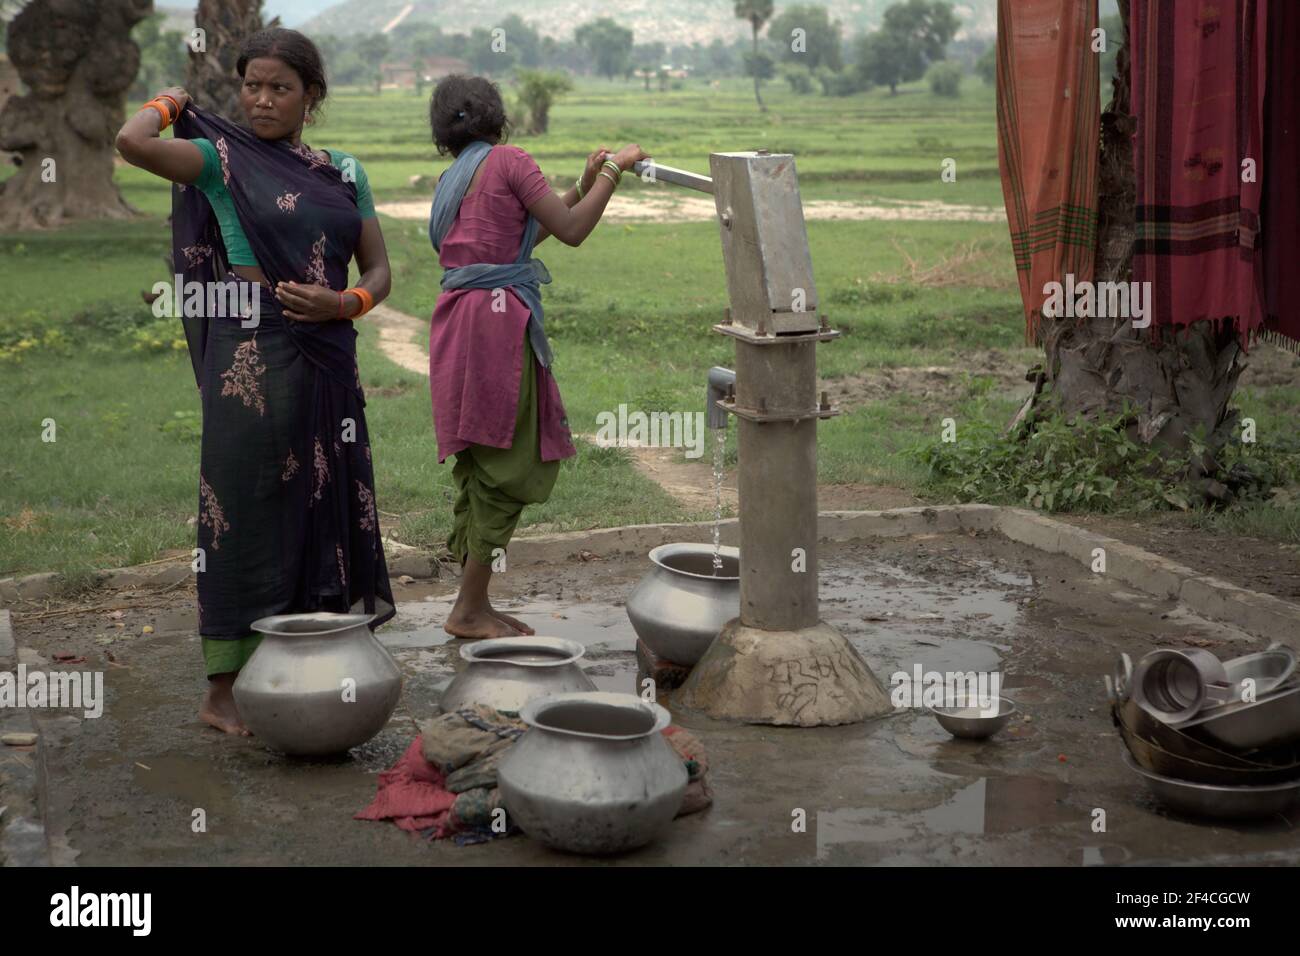 Women taking water from a communal water pump in Faldu village near Nalanda in Bihar, India. Over 3 billion people worldwide are at risk when using water because the health of their water source--rivers, lakes, or groundwaters--is unknown due to lack of water quality data, according to UN Water in their Summary Progress Update 2021 published on March 1, 2021 in Geneva. Stock Photo